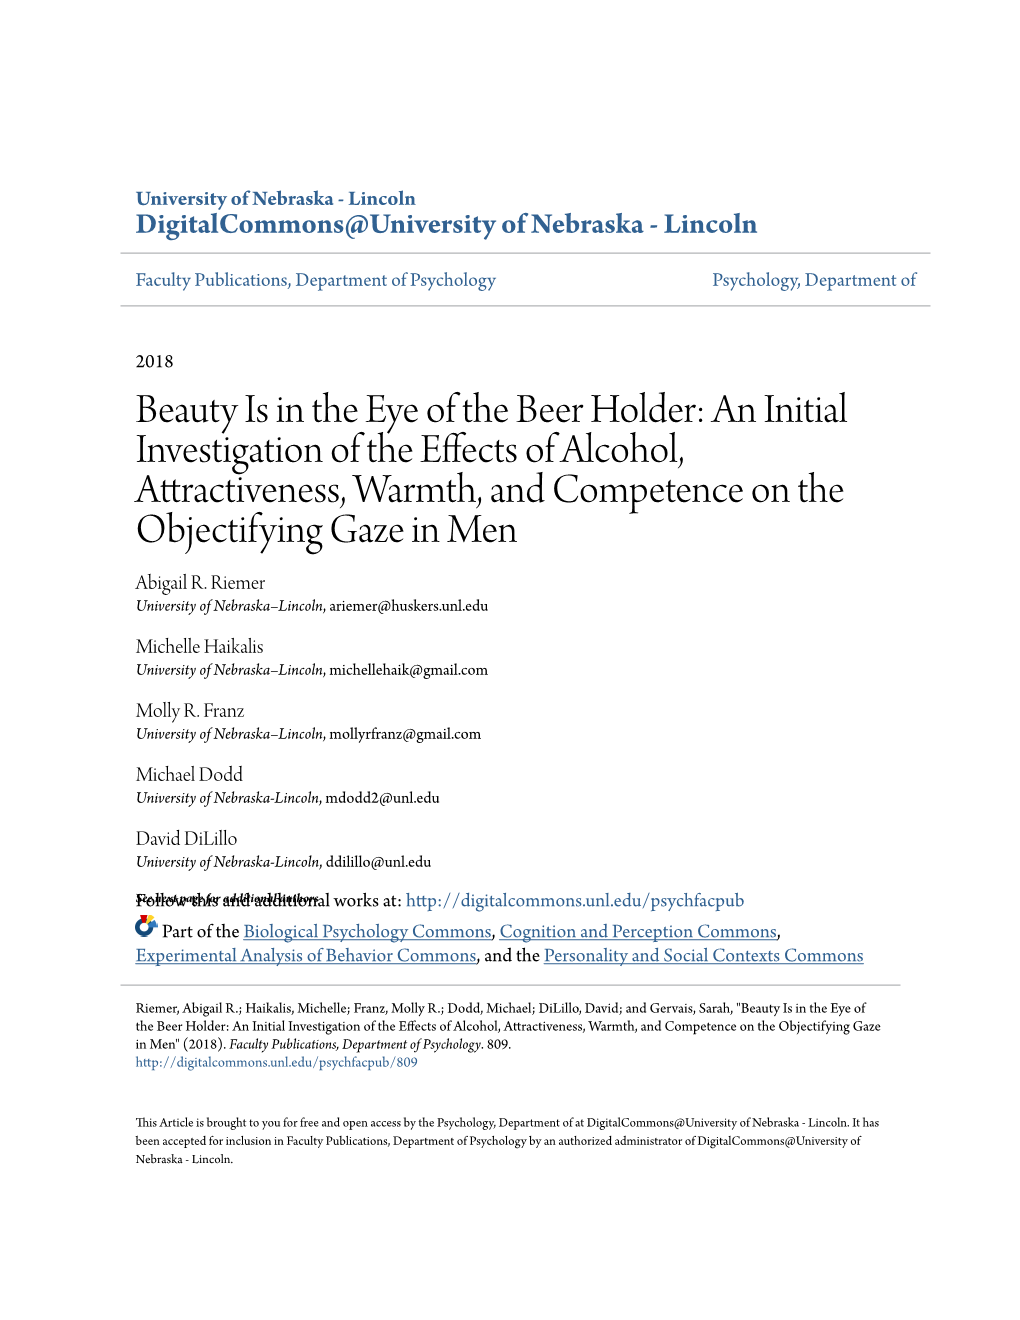 Beauty Is in the Eye of the Beer Holder: an Initial Investigation of the Effects of Alcohol, Attractiveness, Warmth, and Compete